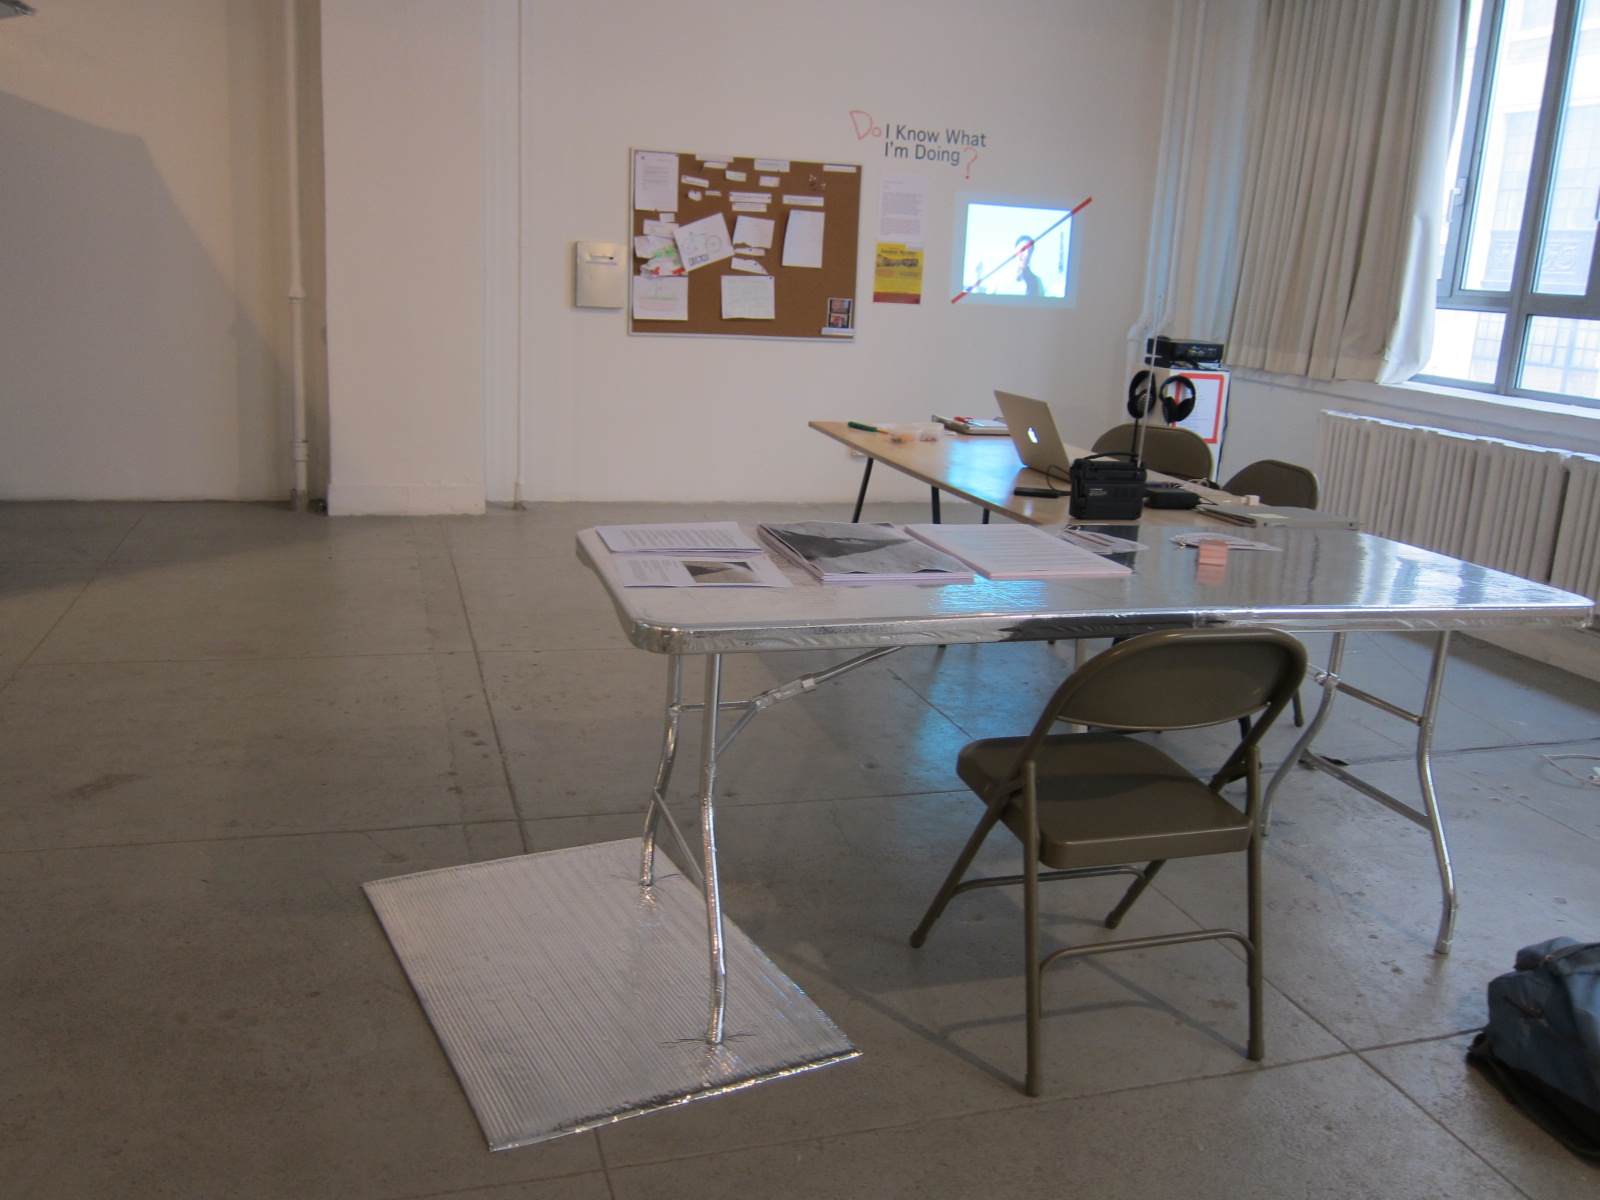  Installation view of  Failing to Levitate  